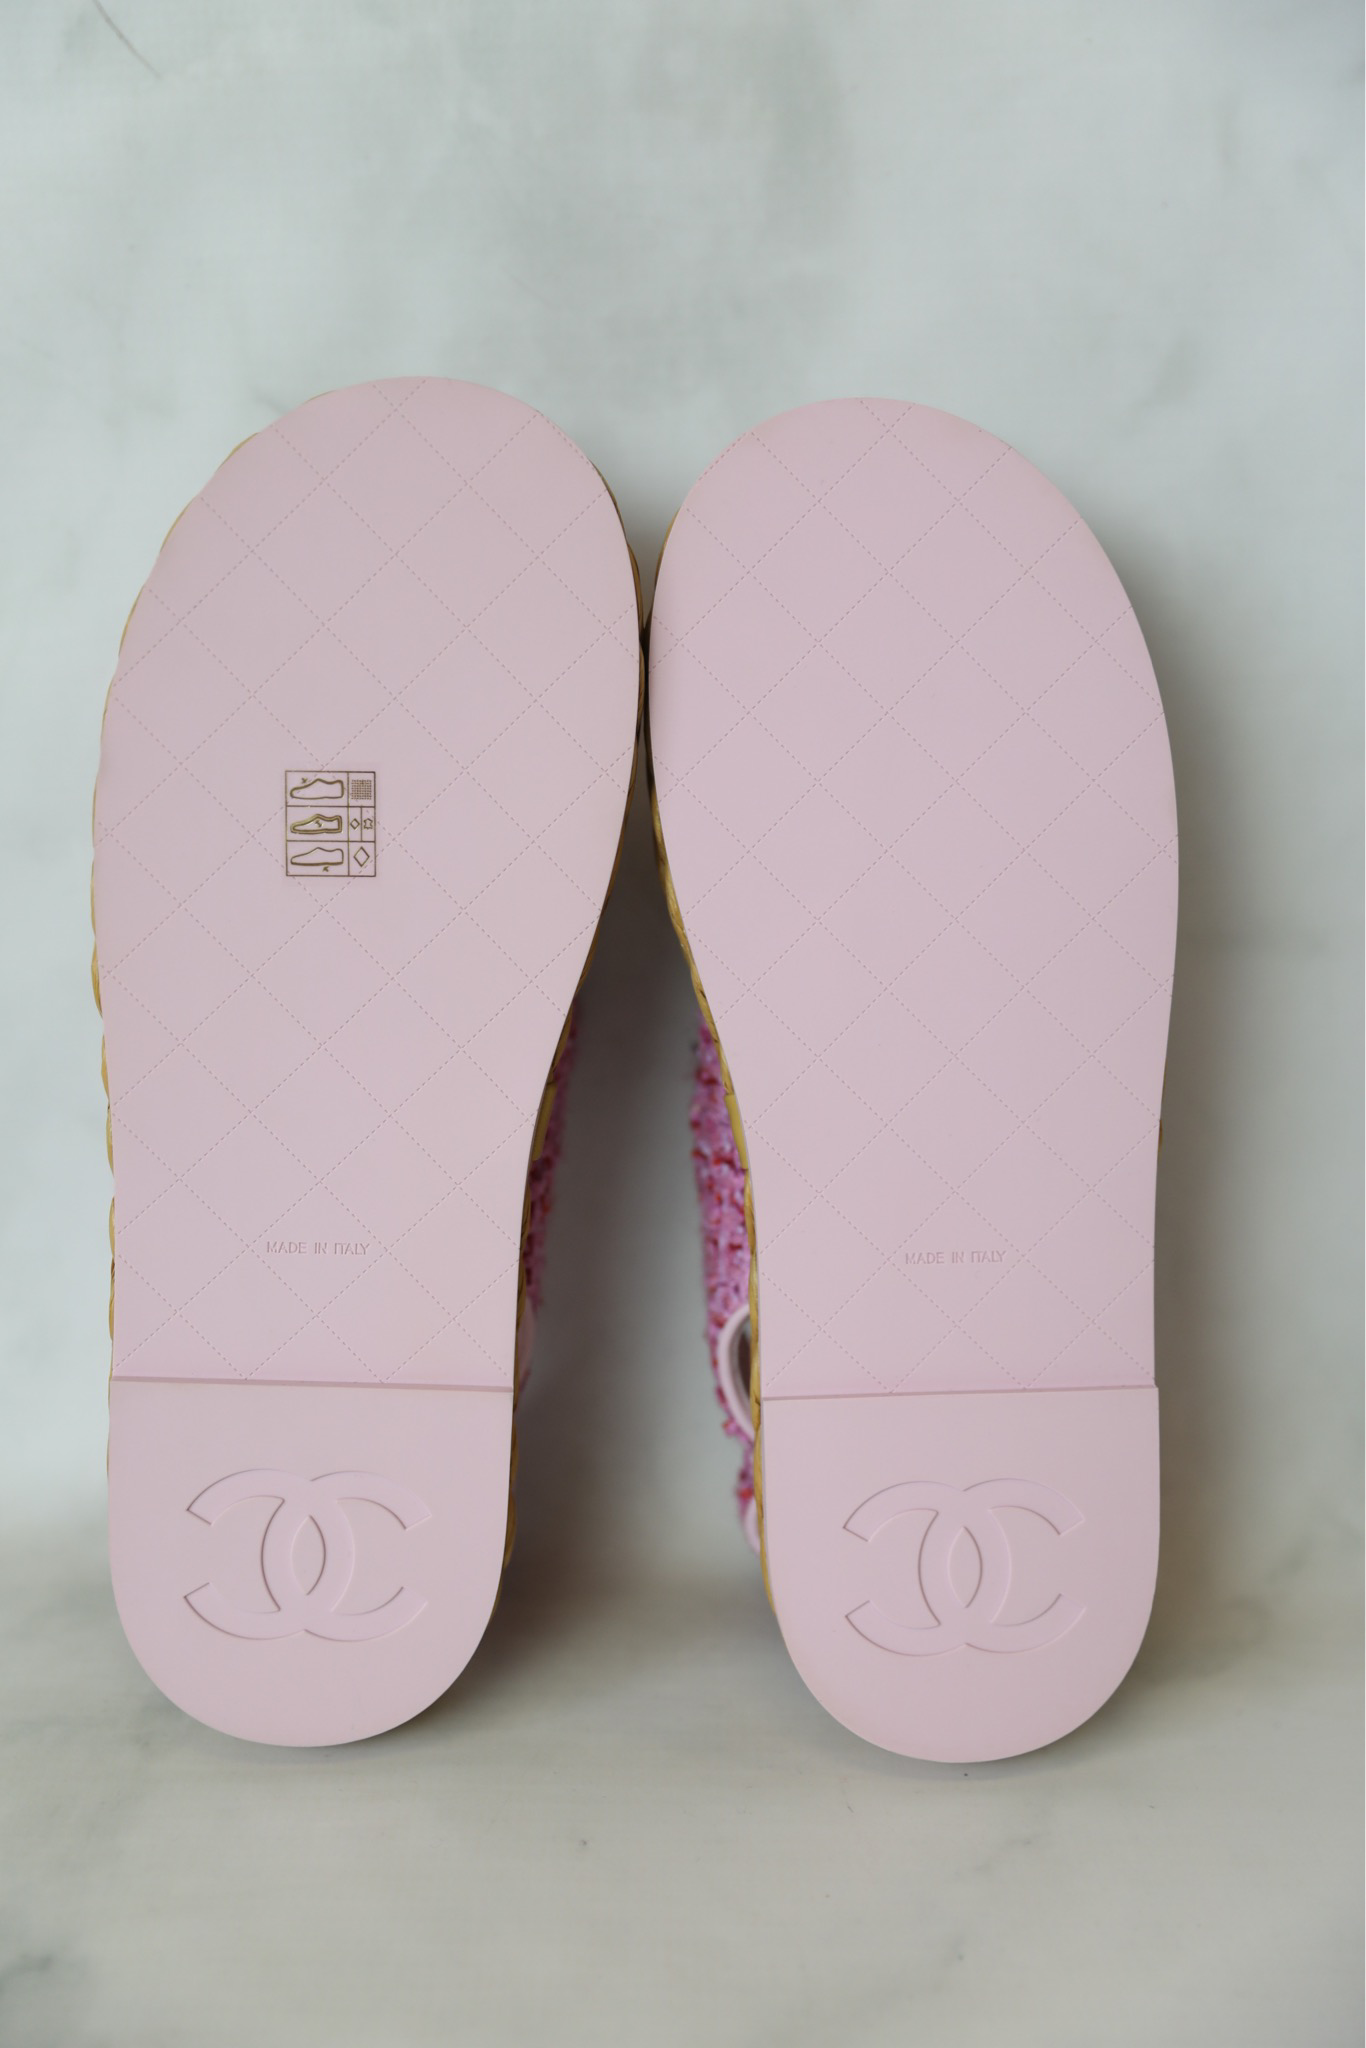 Chanel Dad Sandals, Pink Tweed, Size 40, New In Box WA001